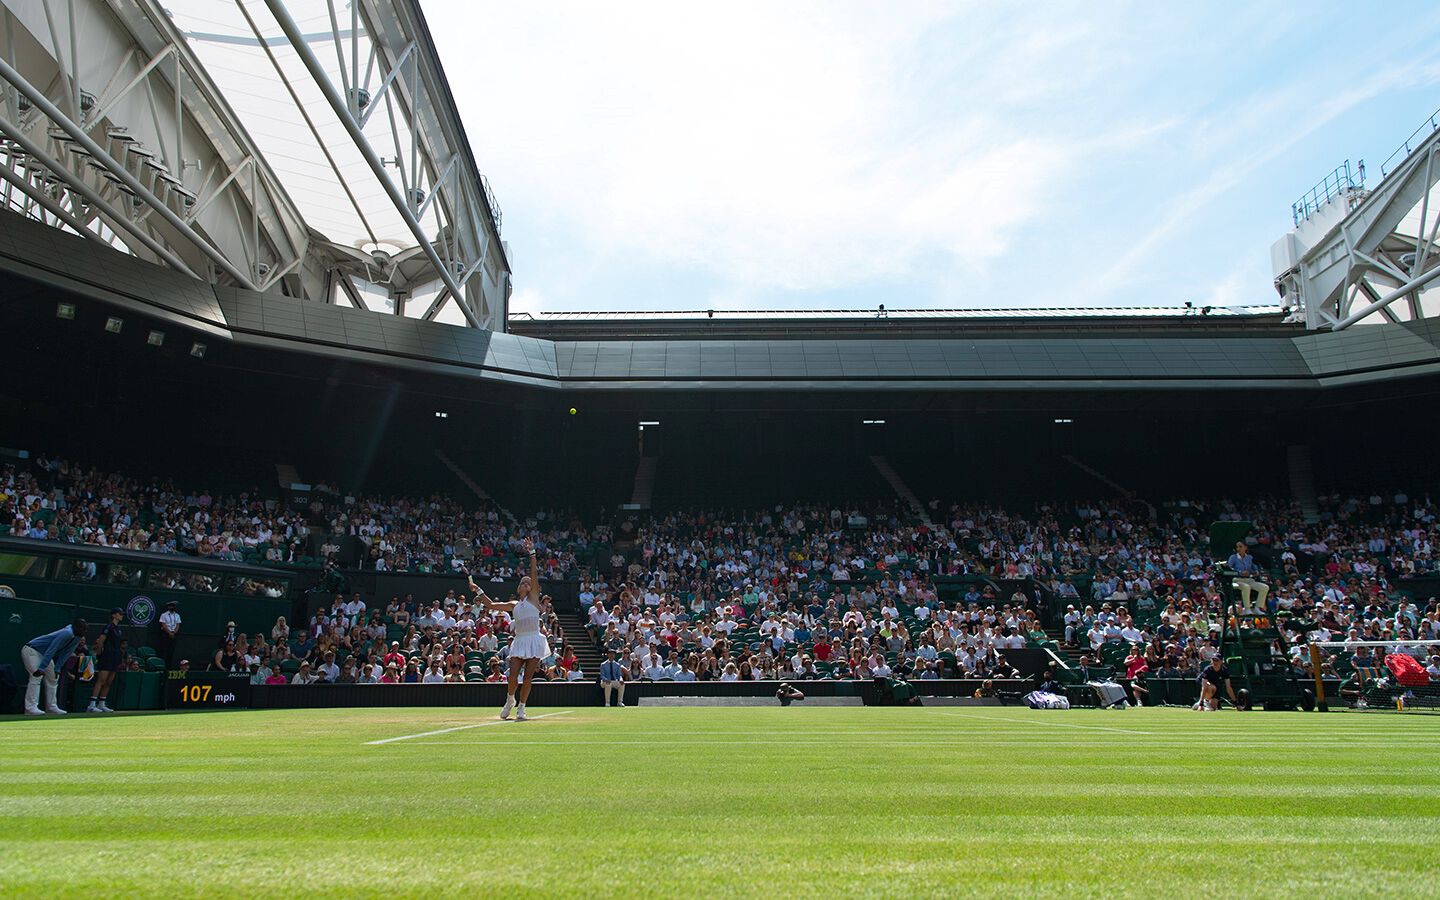 The stands are packed at Wimbledon as a tennis star prepares her serve.